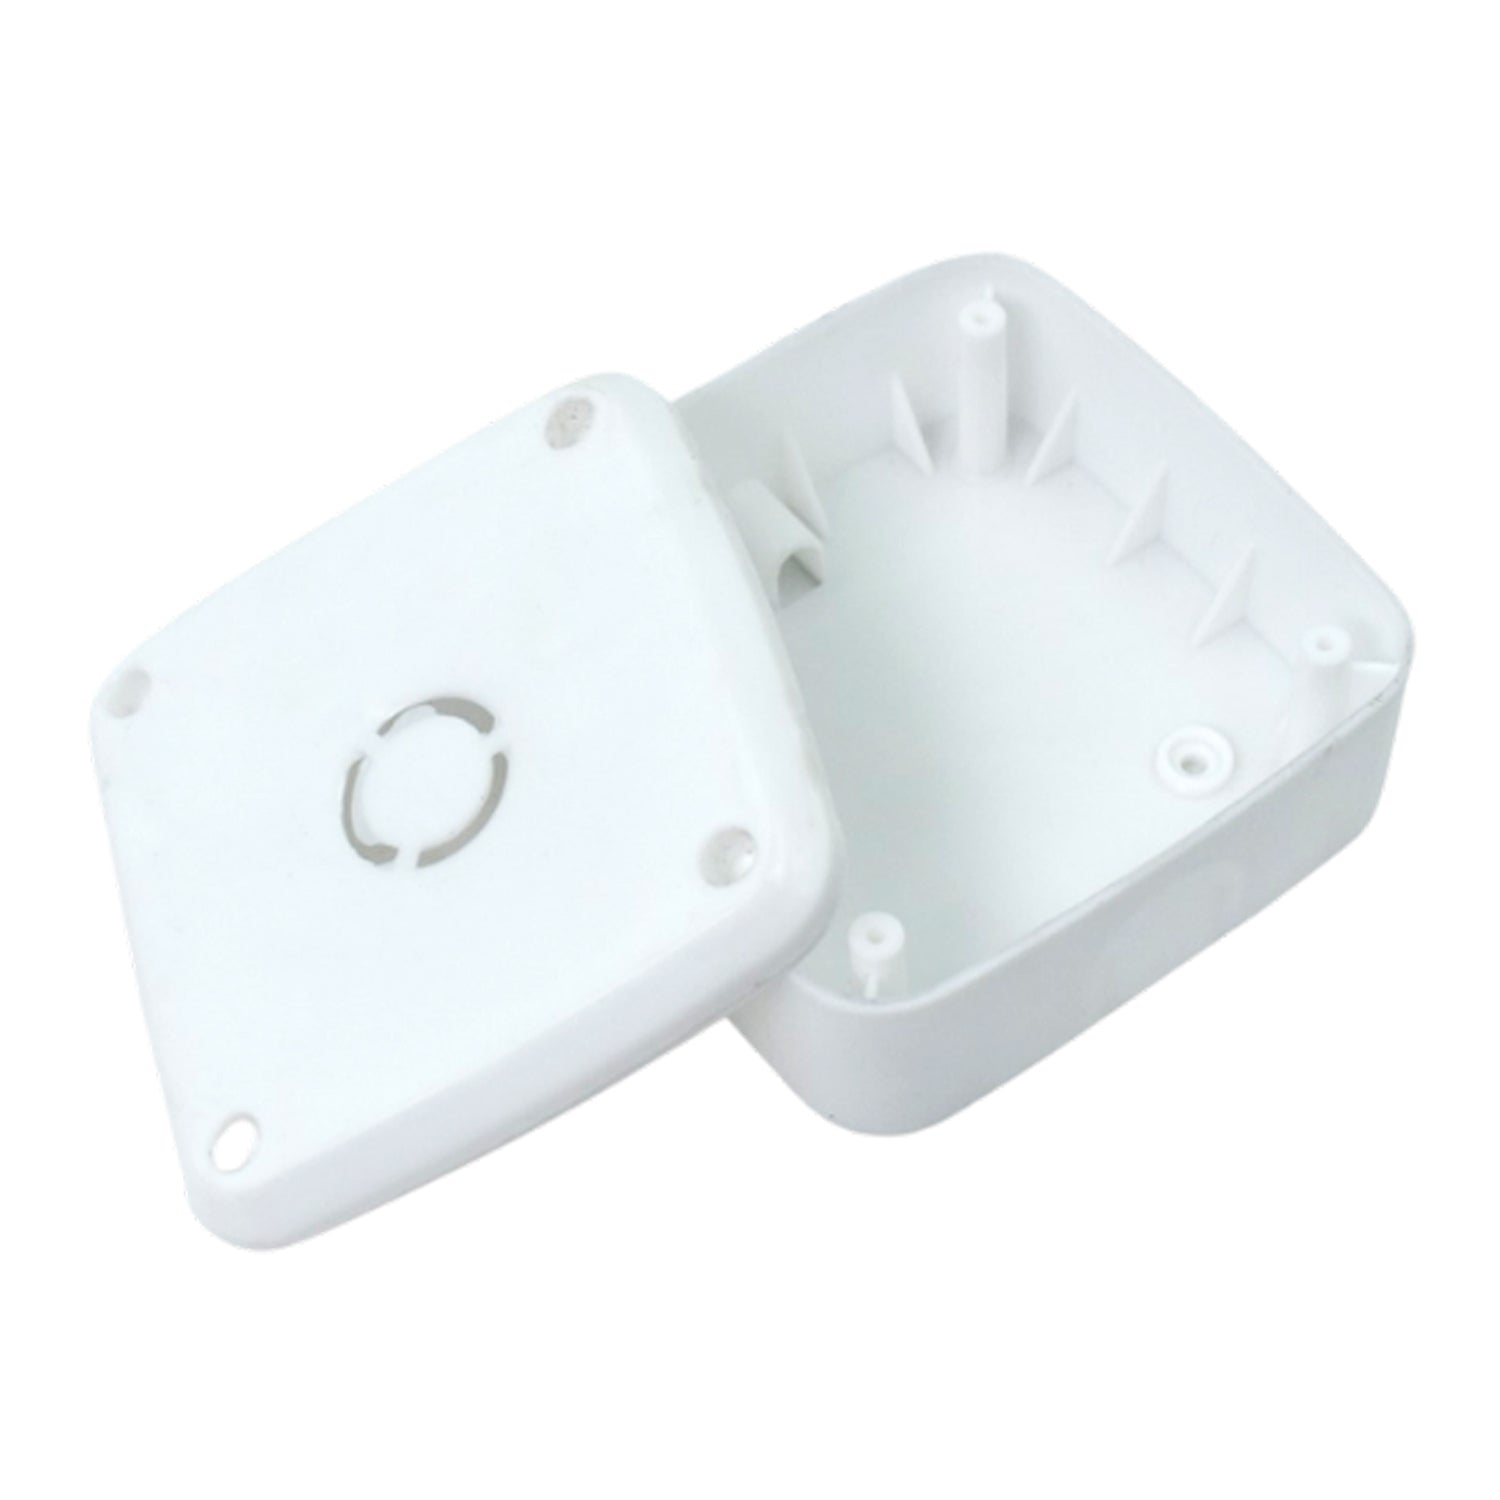 9032 Camera Mounting Box used for storing camera which helps it from being comes in contact with damages.